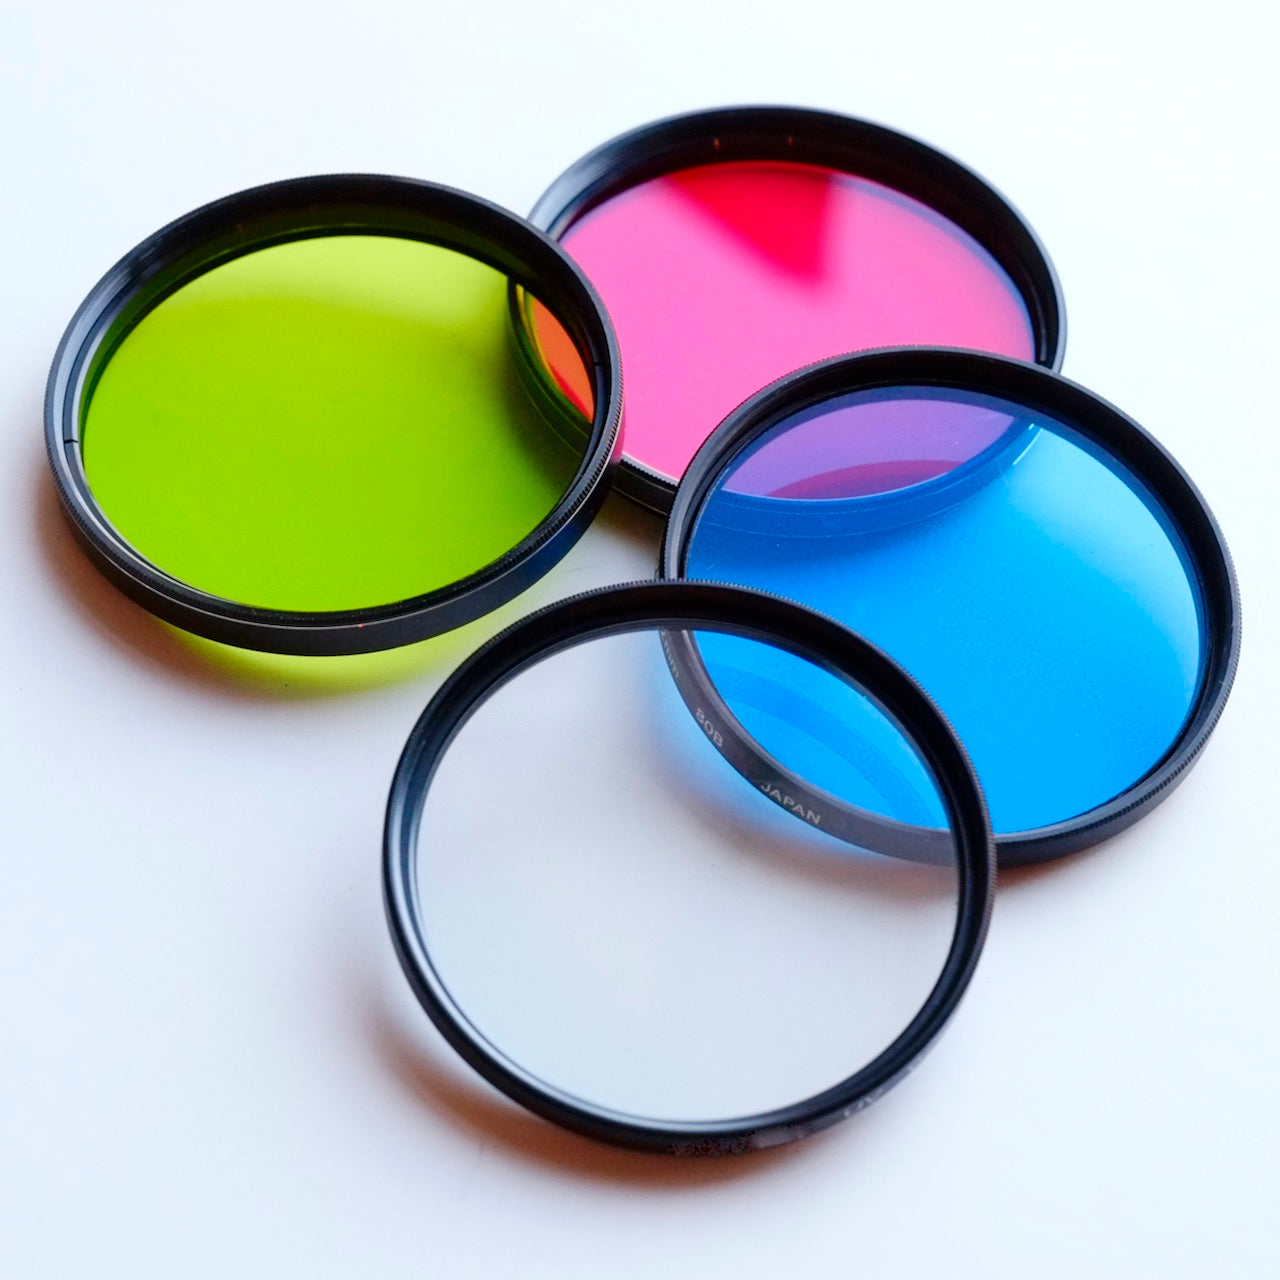 46mm filters